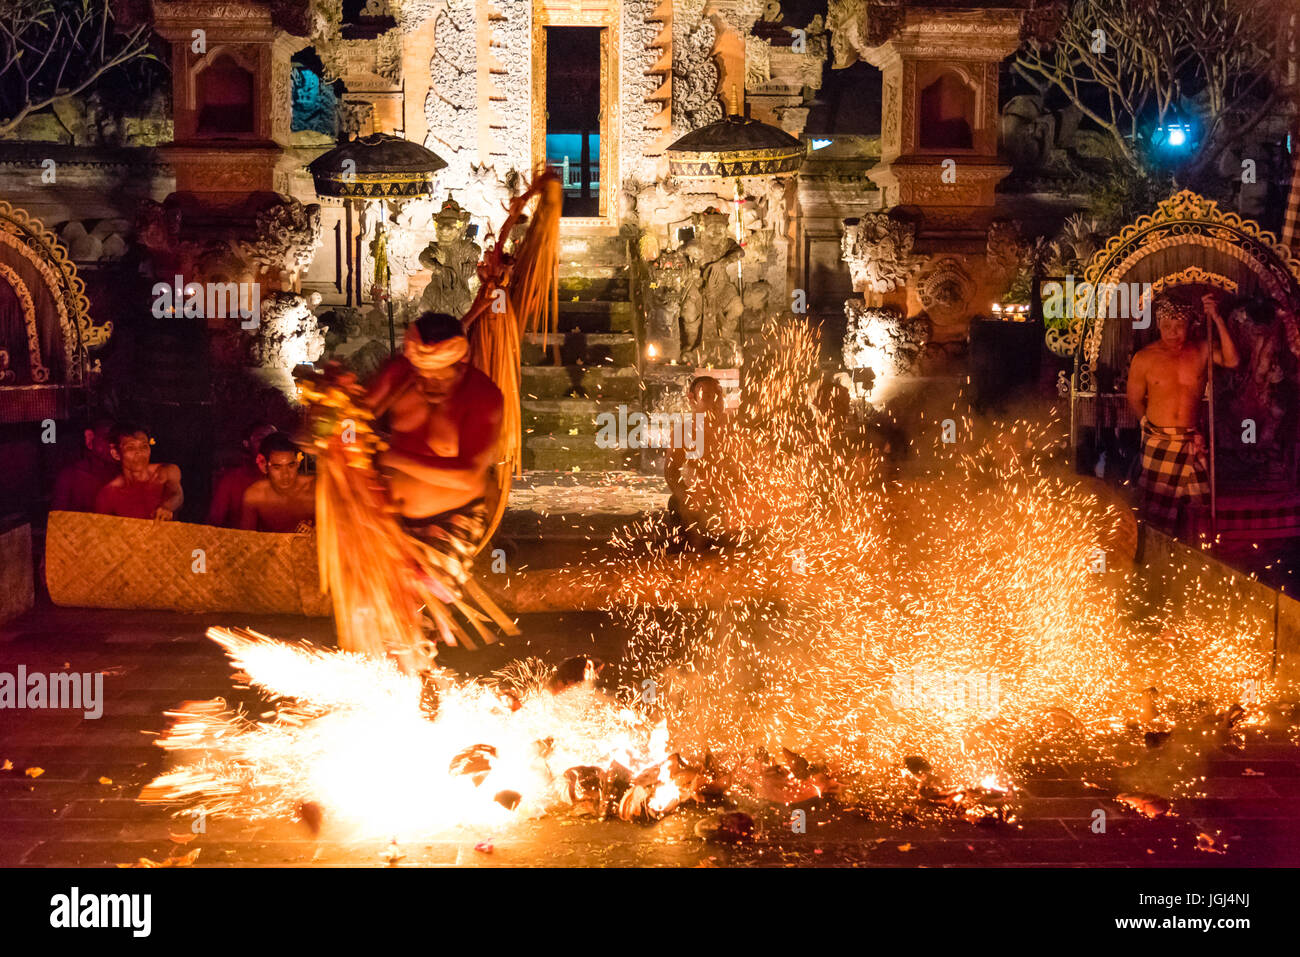 Bali, Indonesia - May 3, 2017 : Popular Kecak Fire and Trance Dance with a fragment from the Hindu epic Ramayana story presented by Taman Kaja Communi Stock Photo